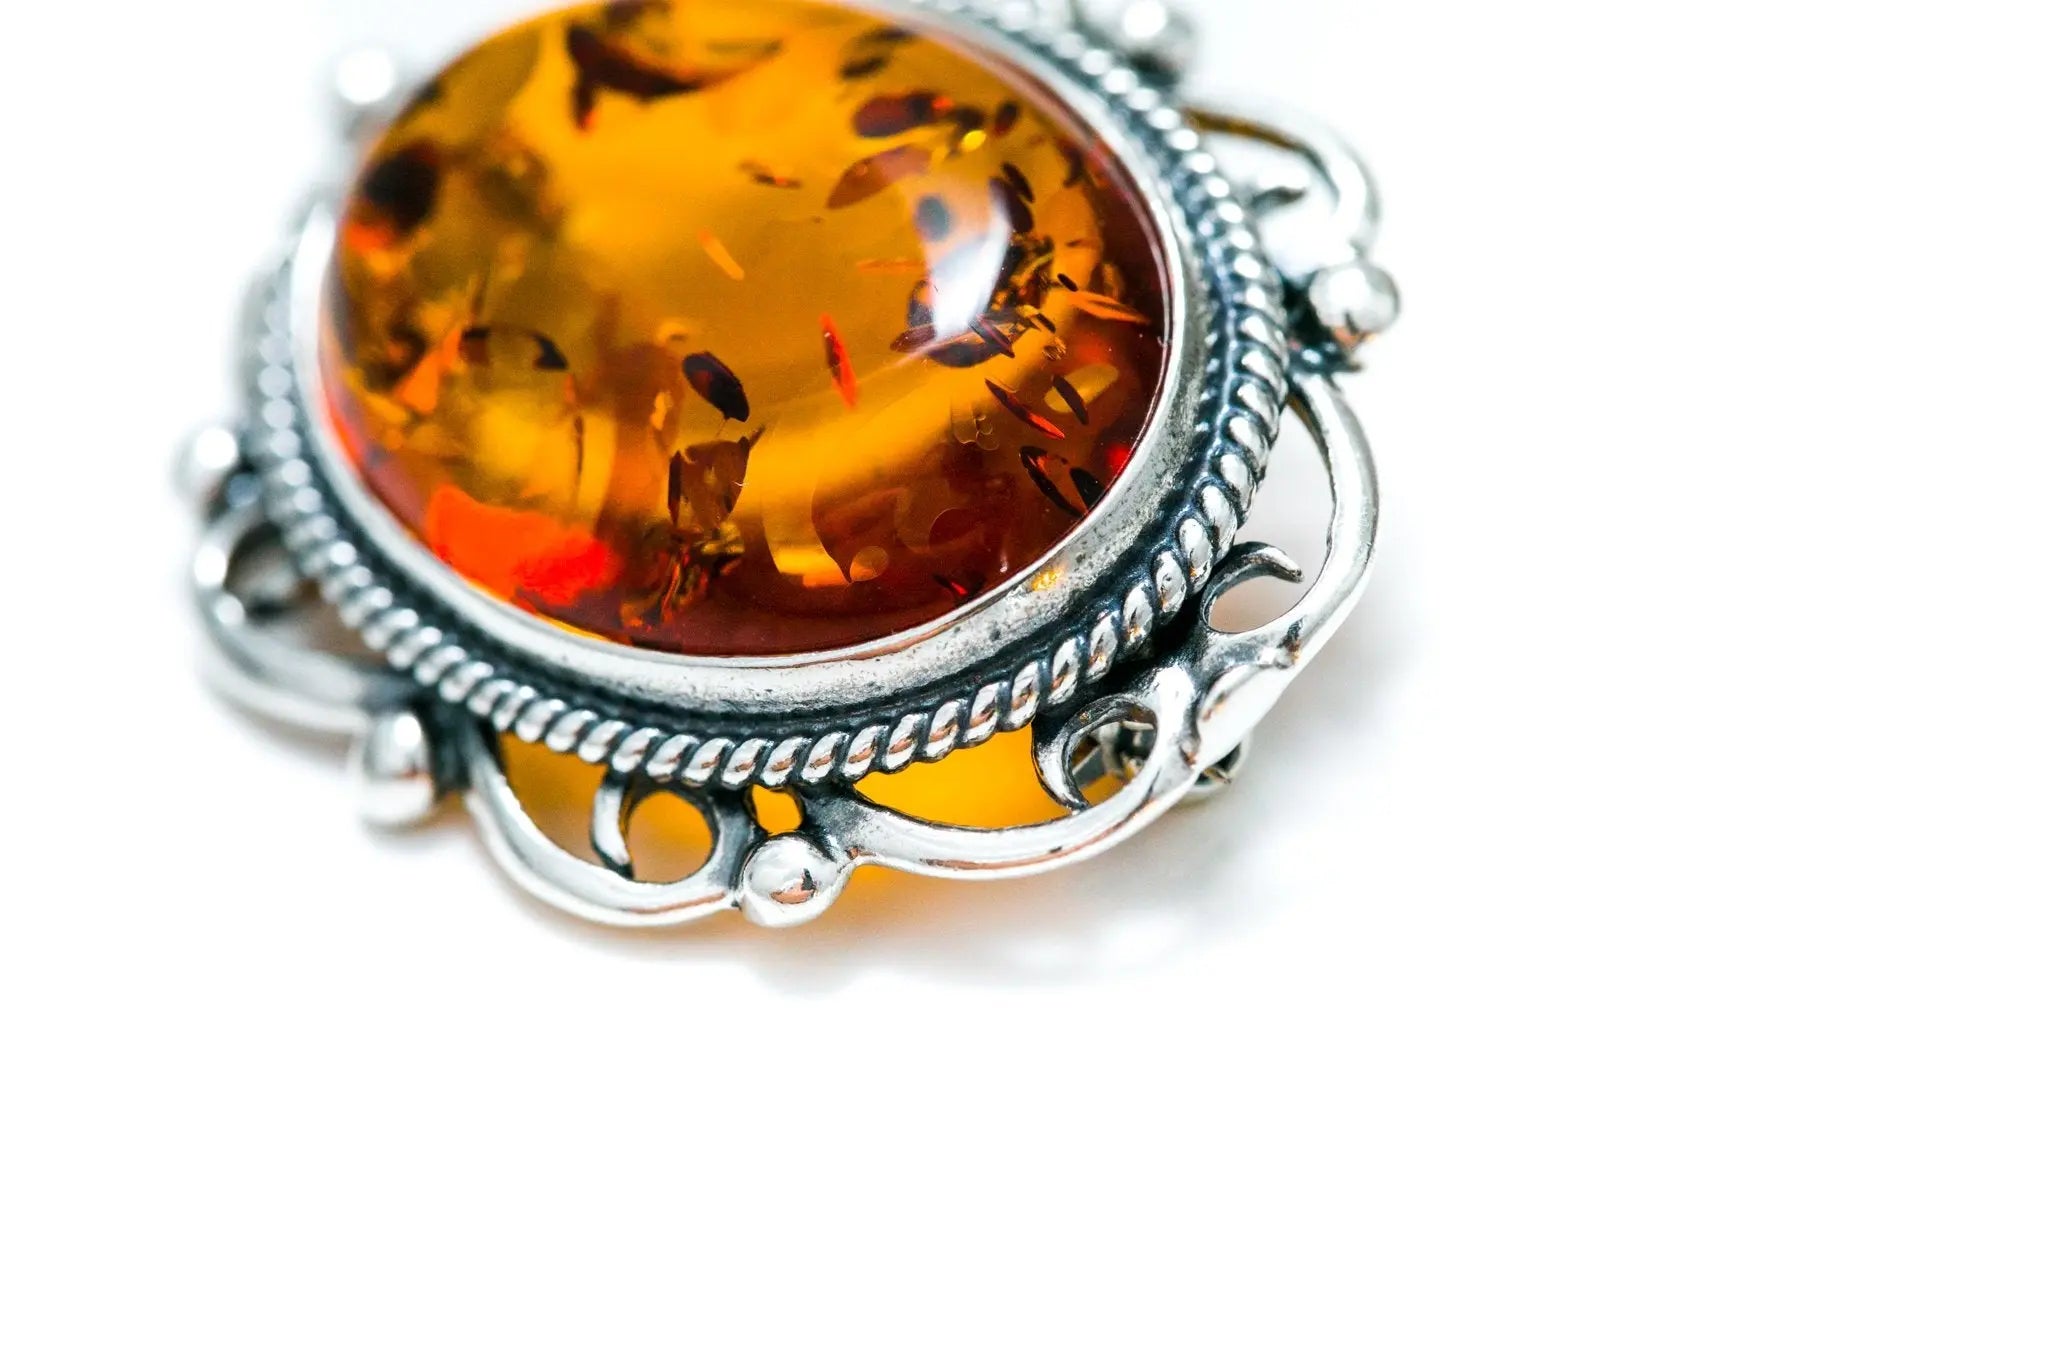 Oval Classic Framed Amber Brooch- Brooches- Baltic Beauty